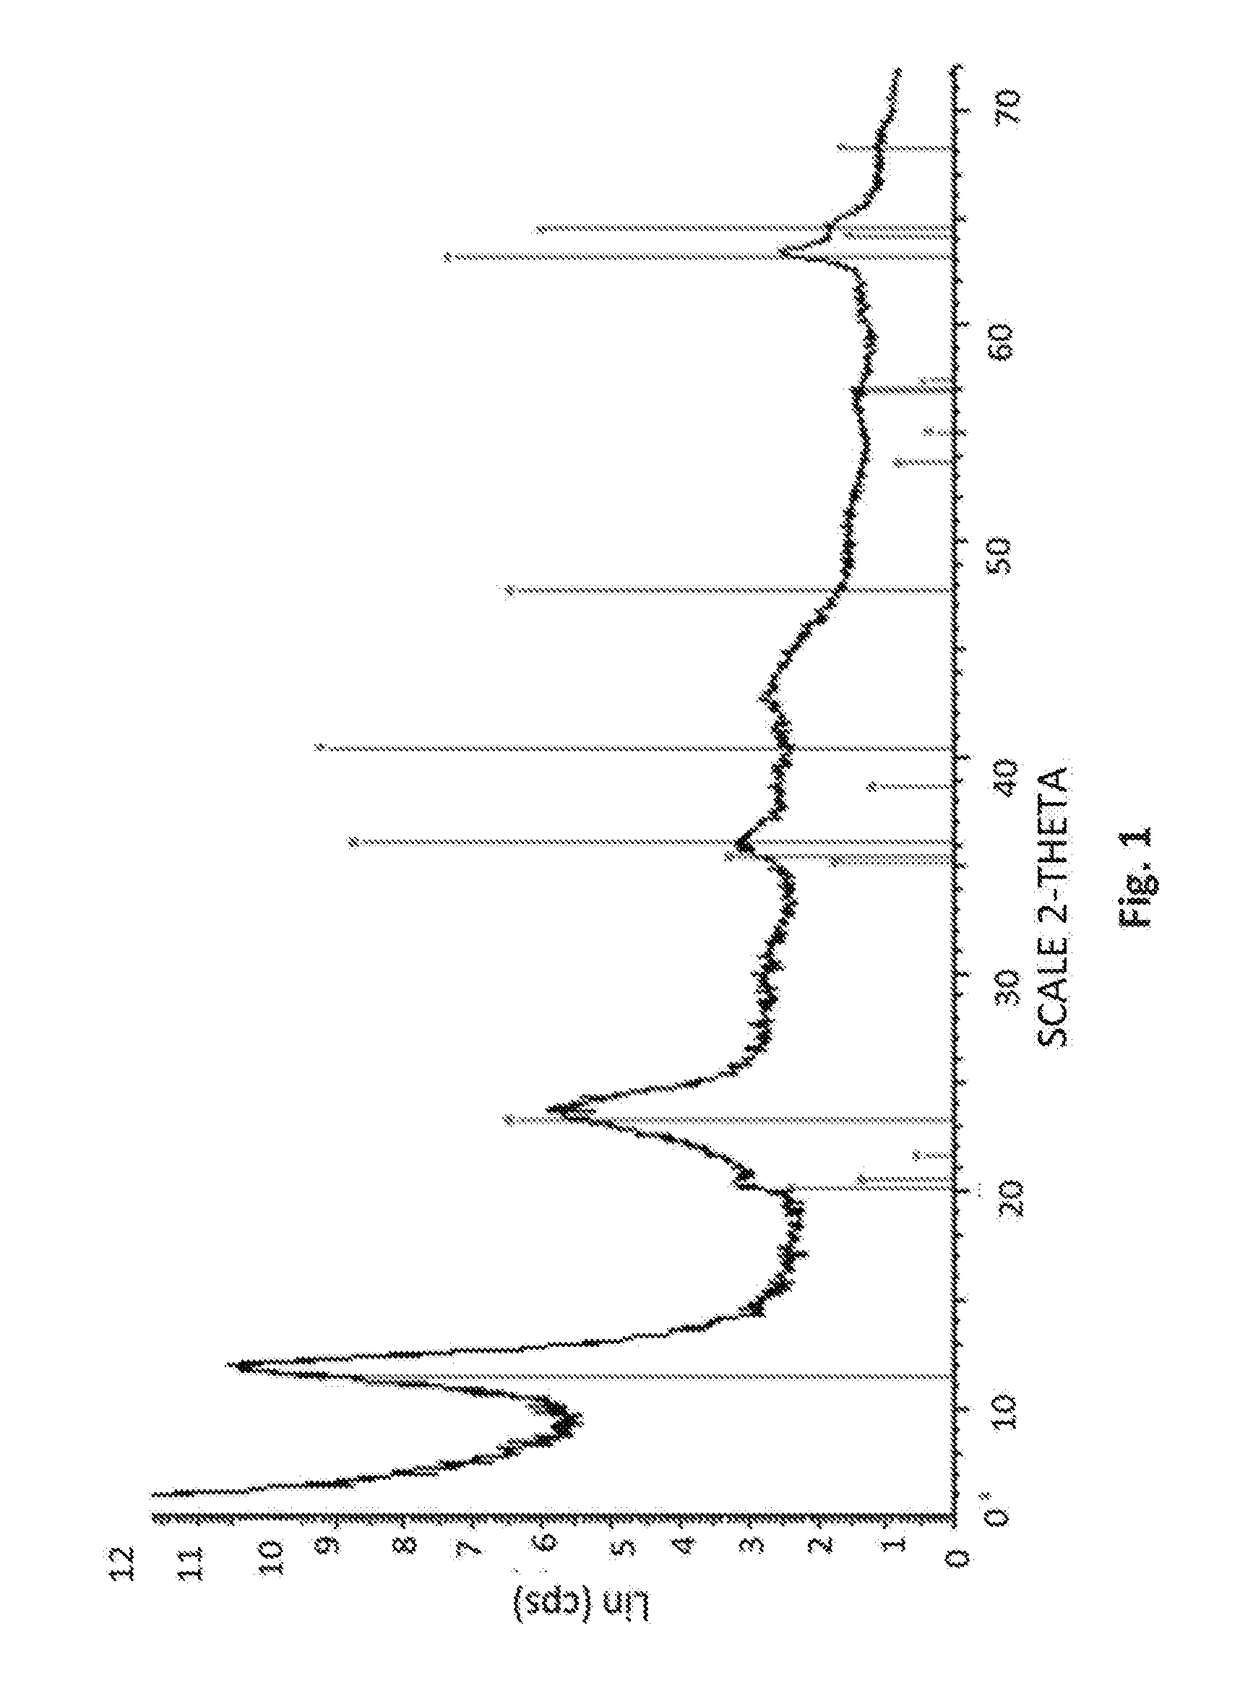 Method for preparing an adsorbent material comprising a step of basic mixing, and method for extracting lithium from saline solutions using said material